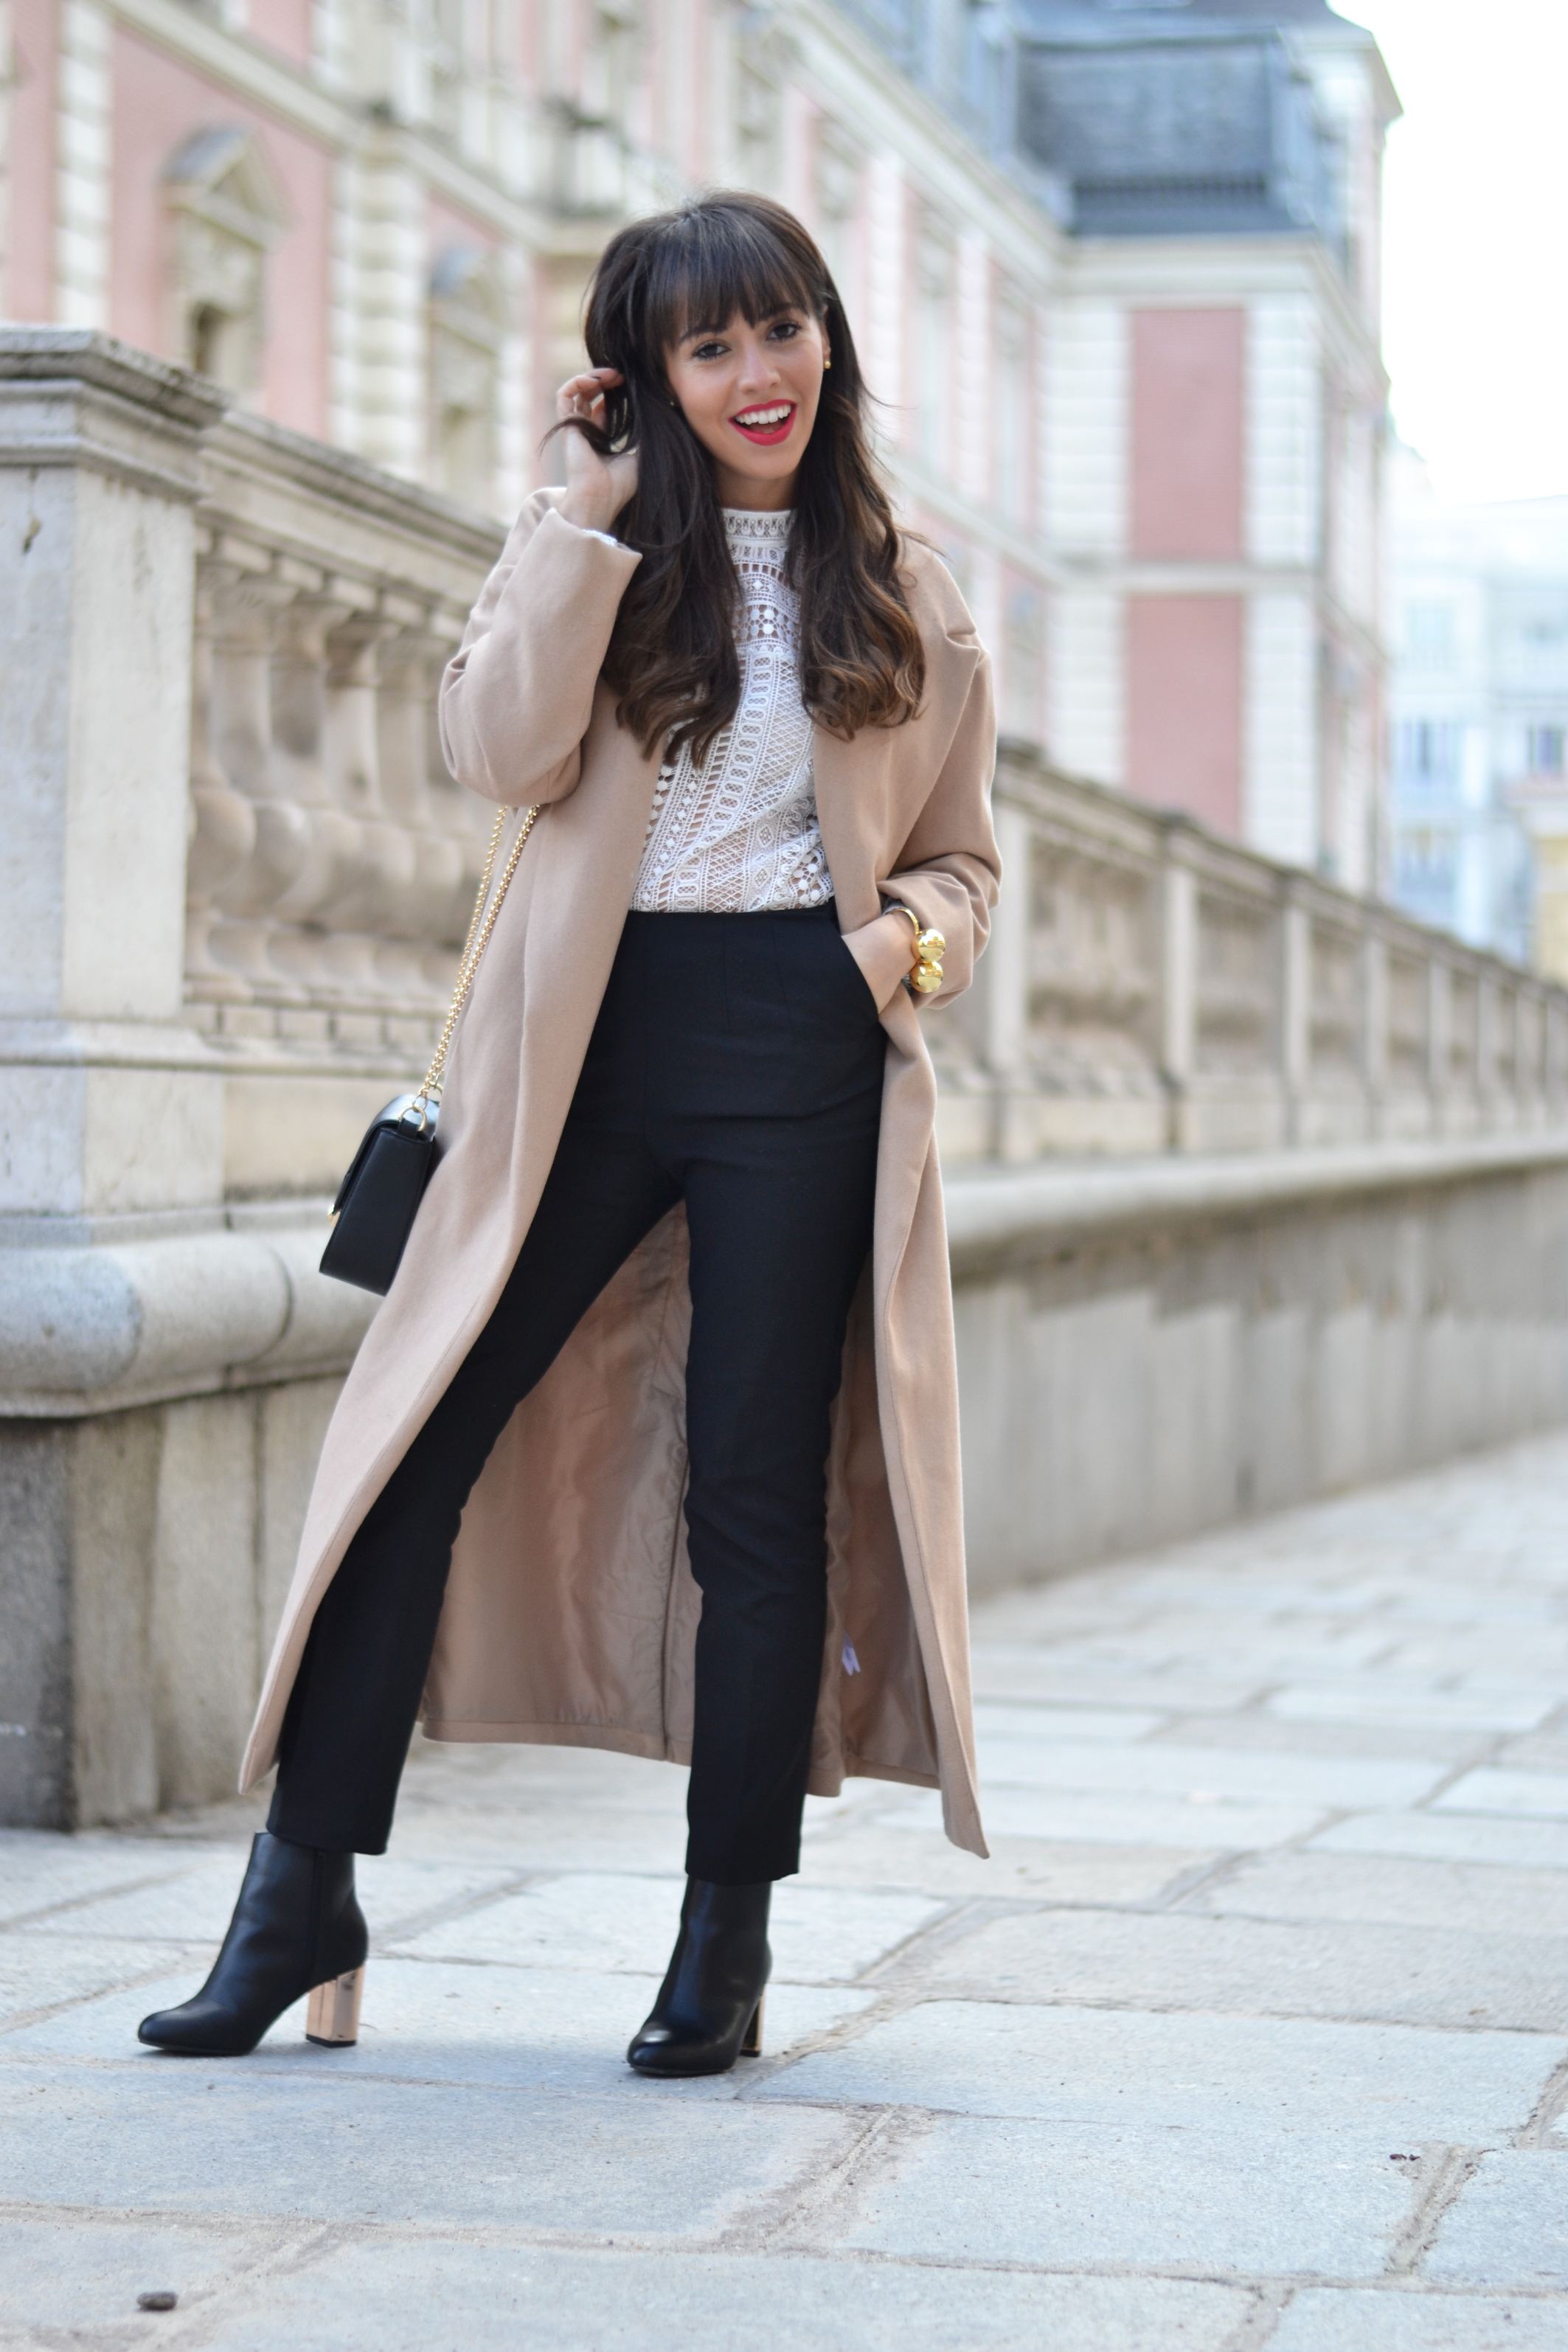 Street style, extra long coat, gold heels boots, La Redoute outfit, winter outfit